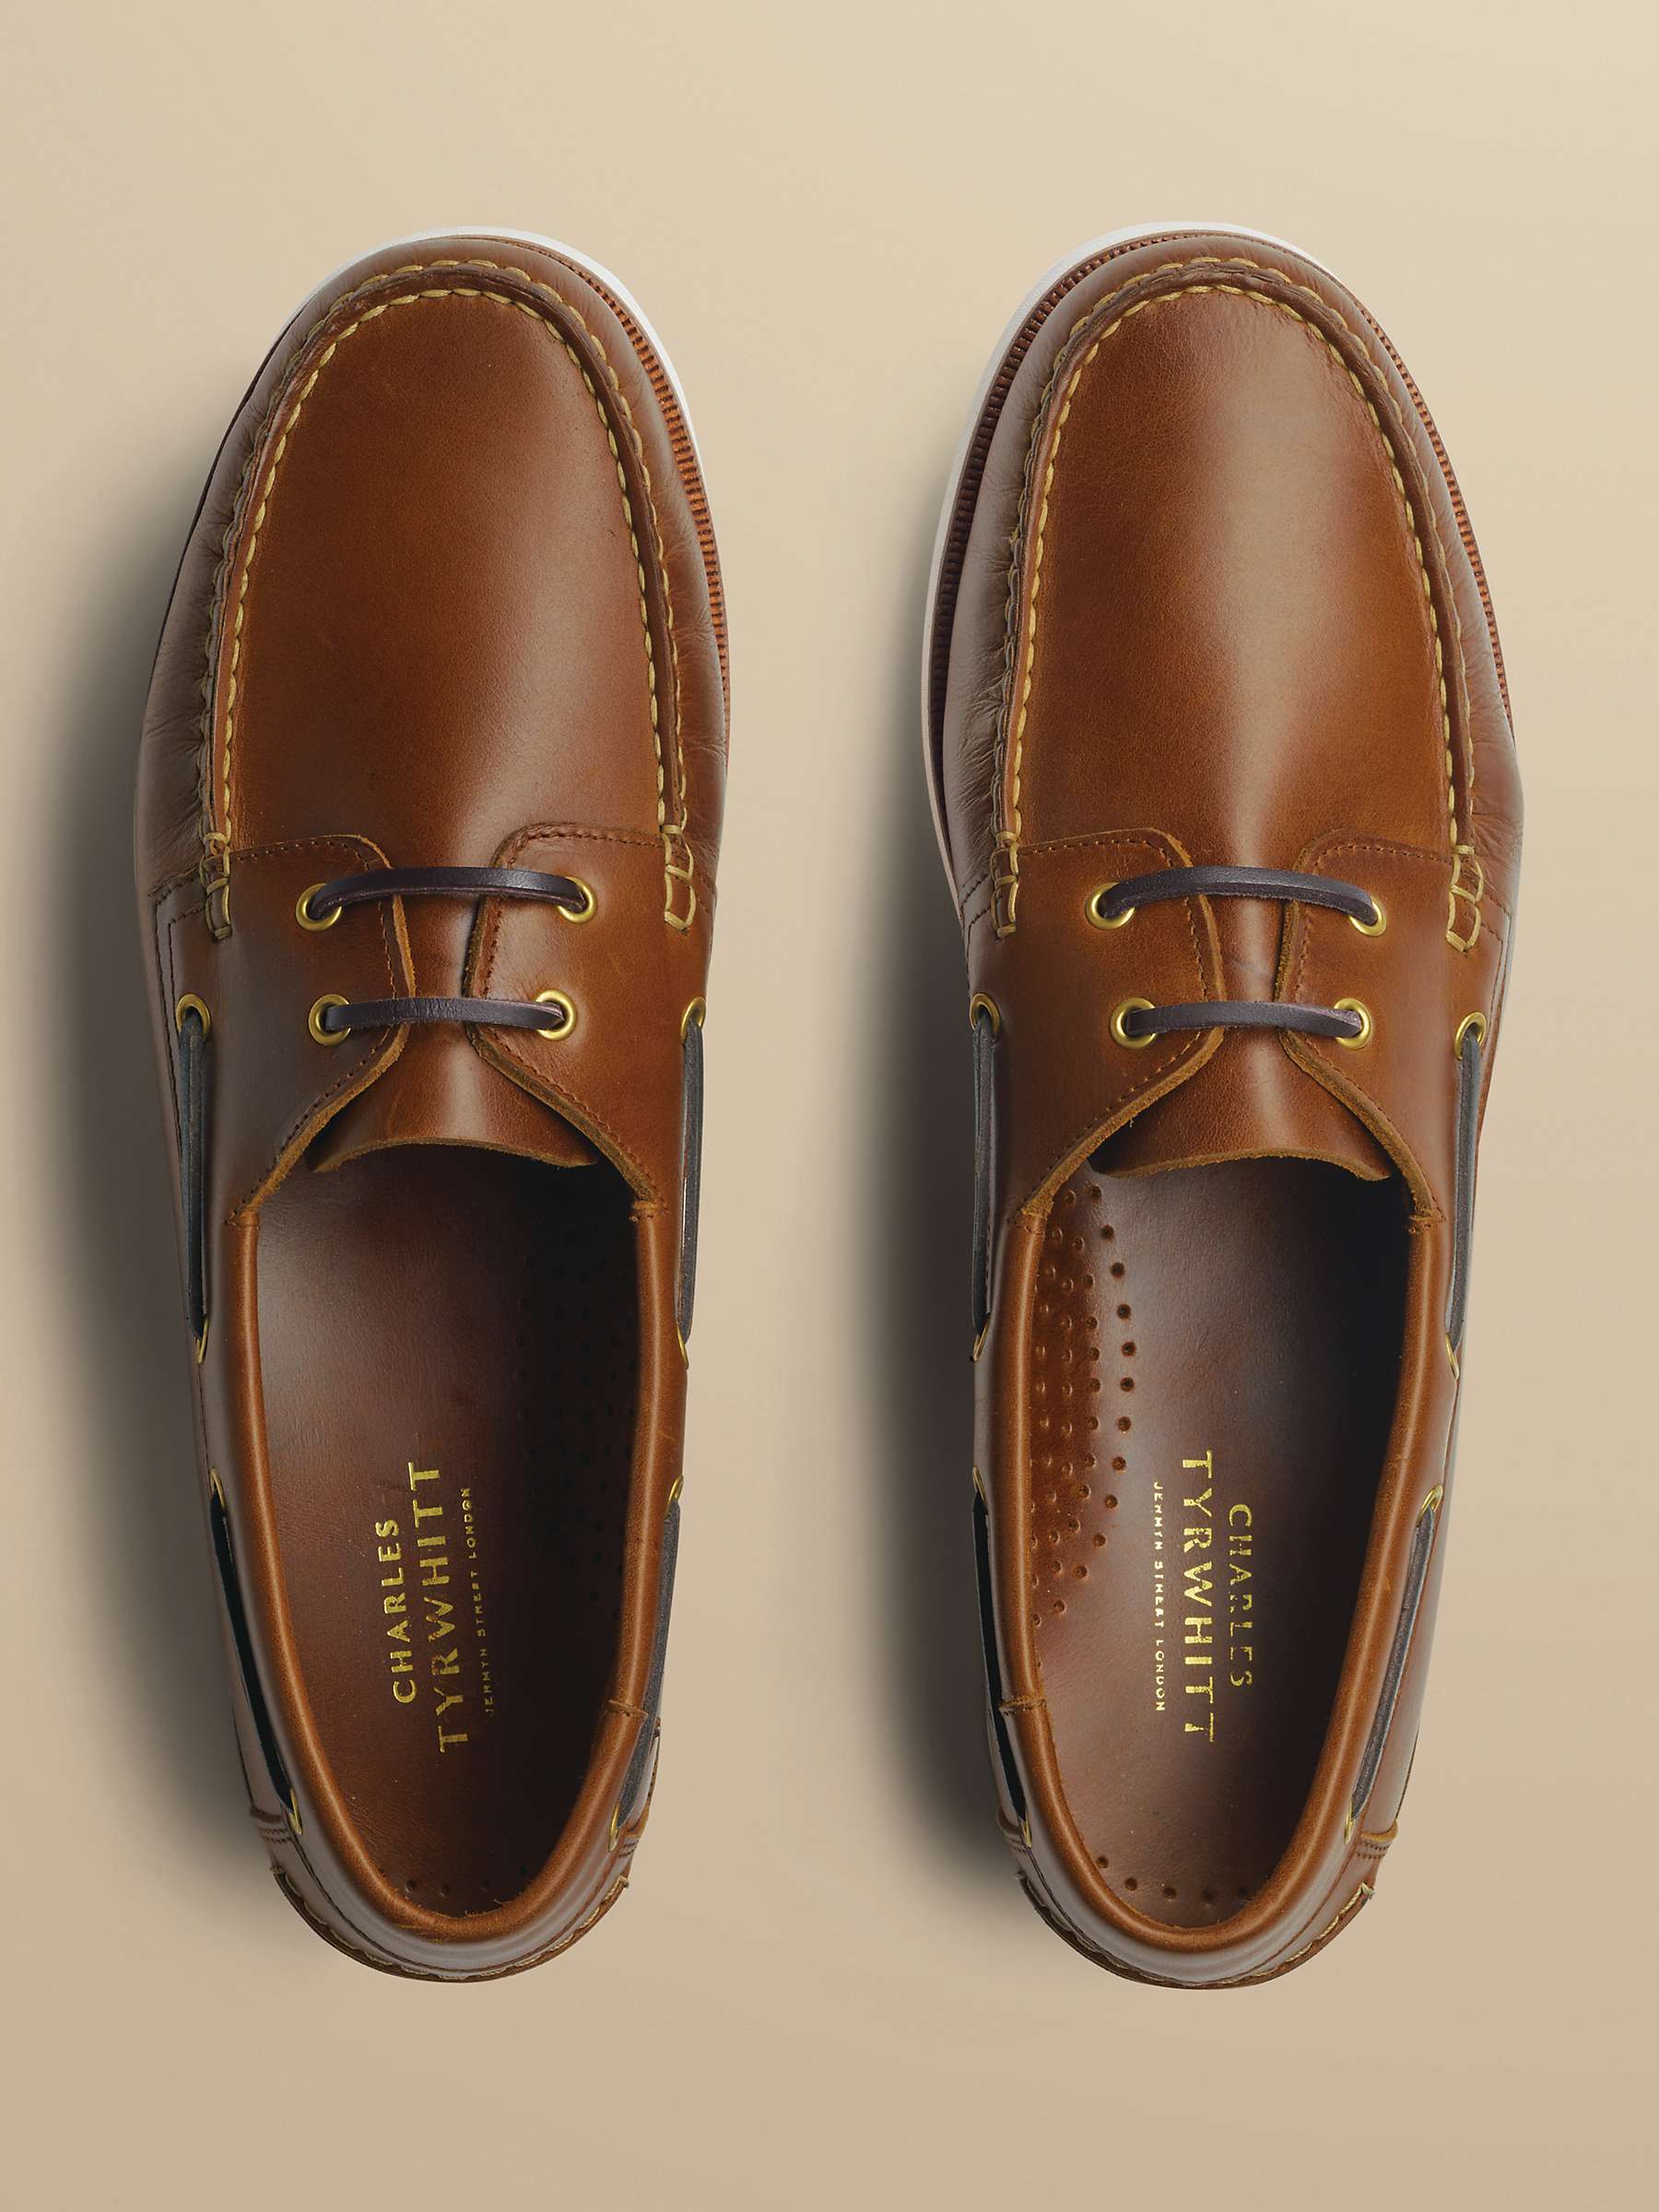 Buy Charles Tyrwhitt Leather Boat Shoes Online at johnlewis.com